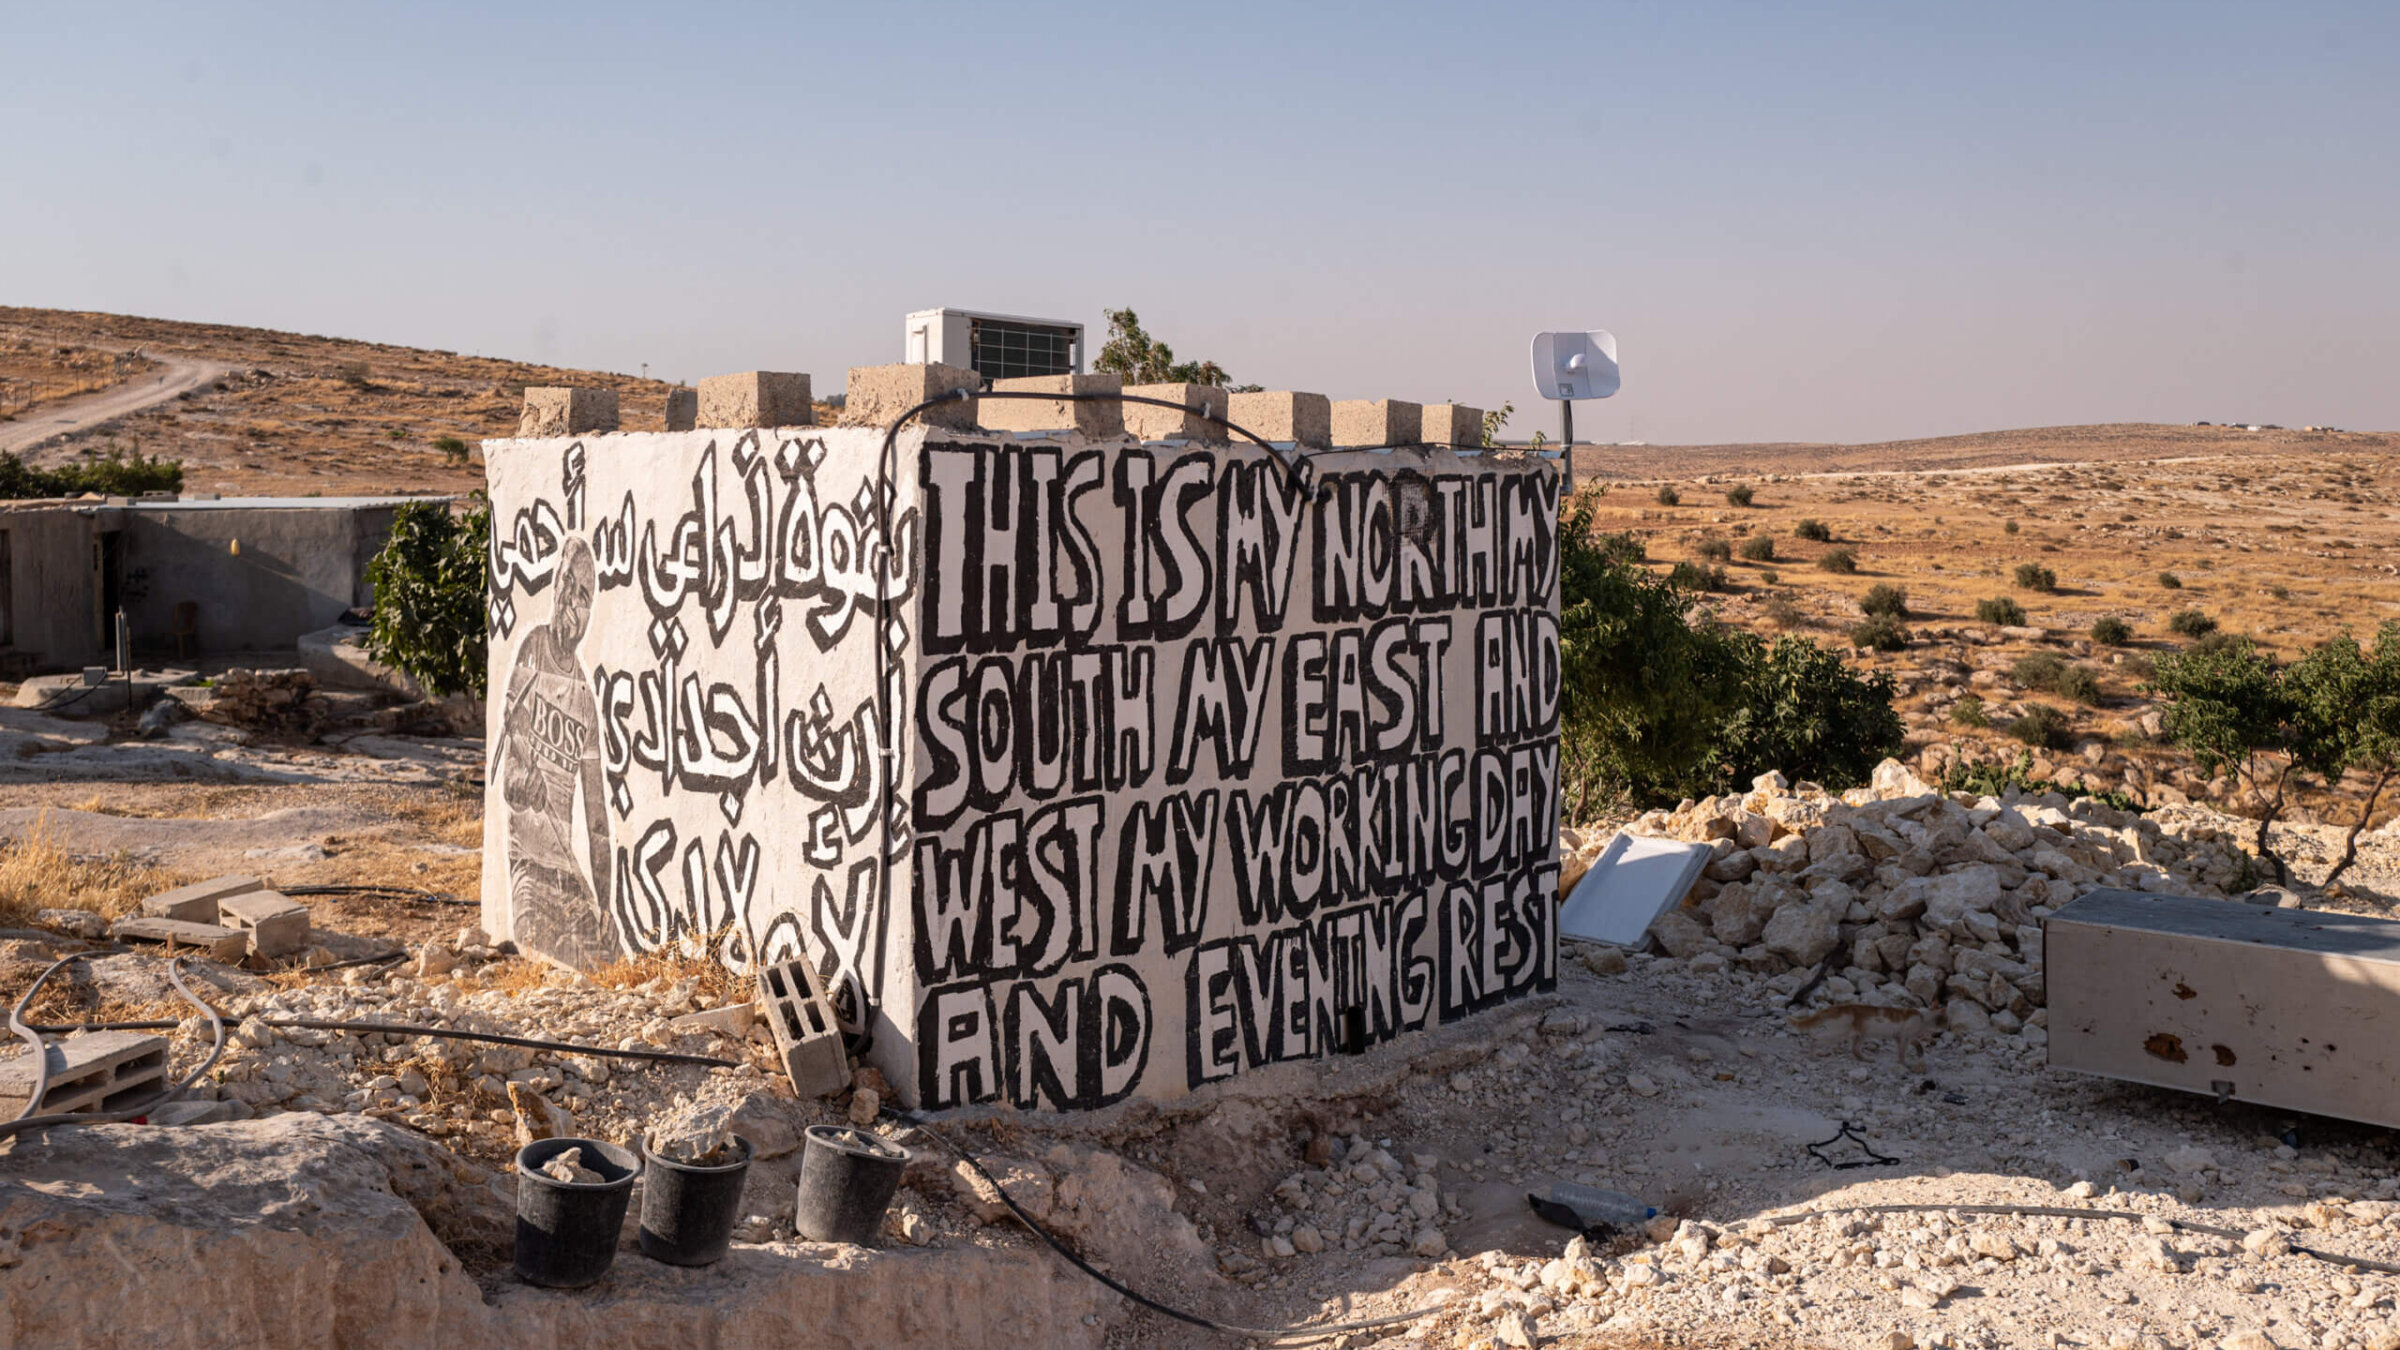 The wall of a building in Palestinian village Masafer Yatta in the West Bank, June 6.